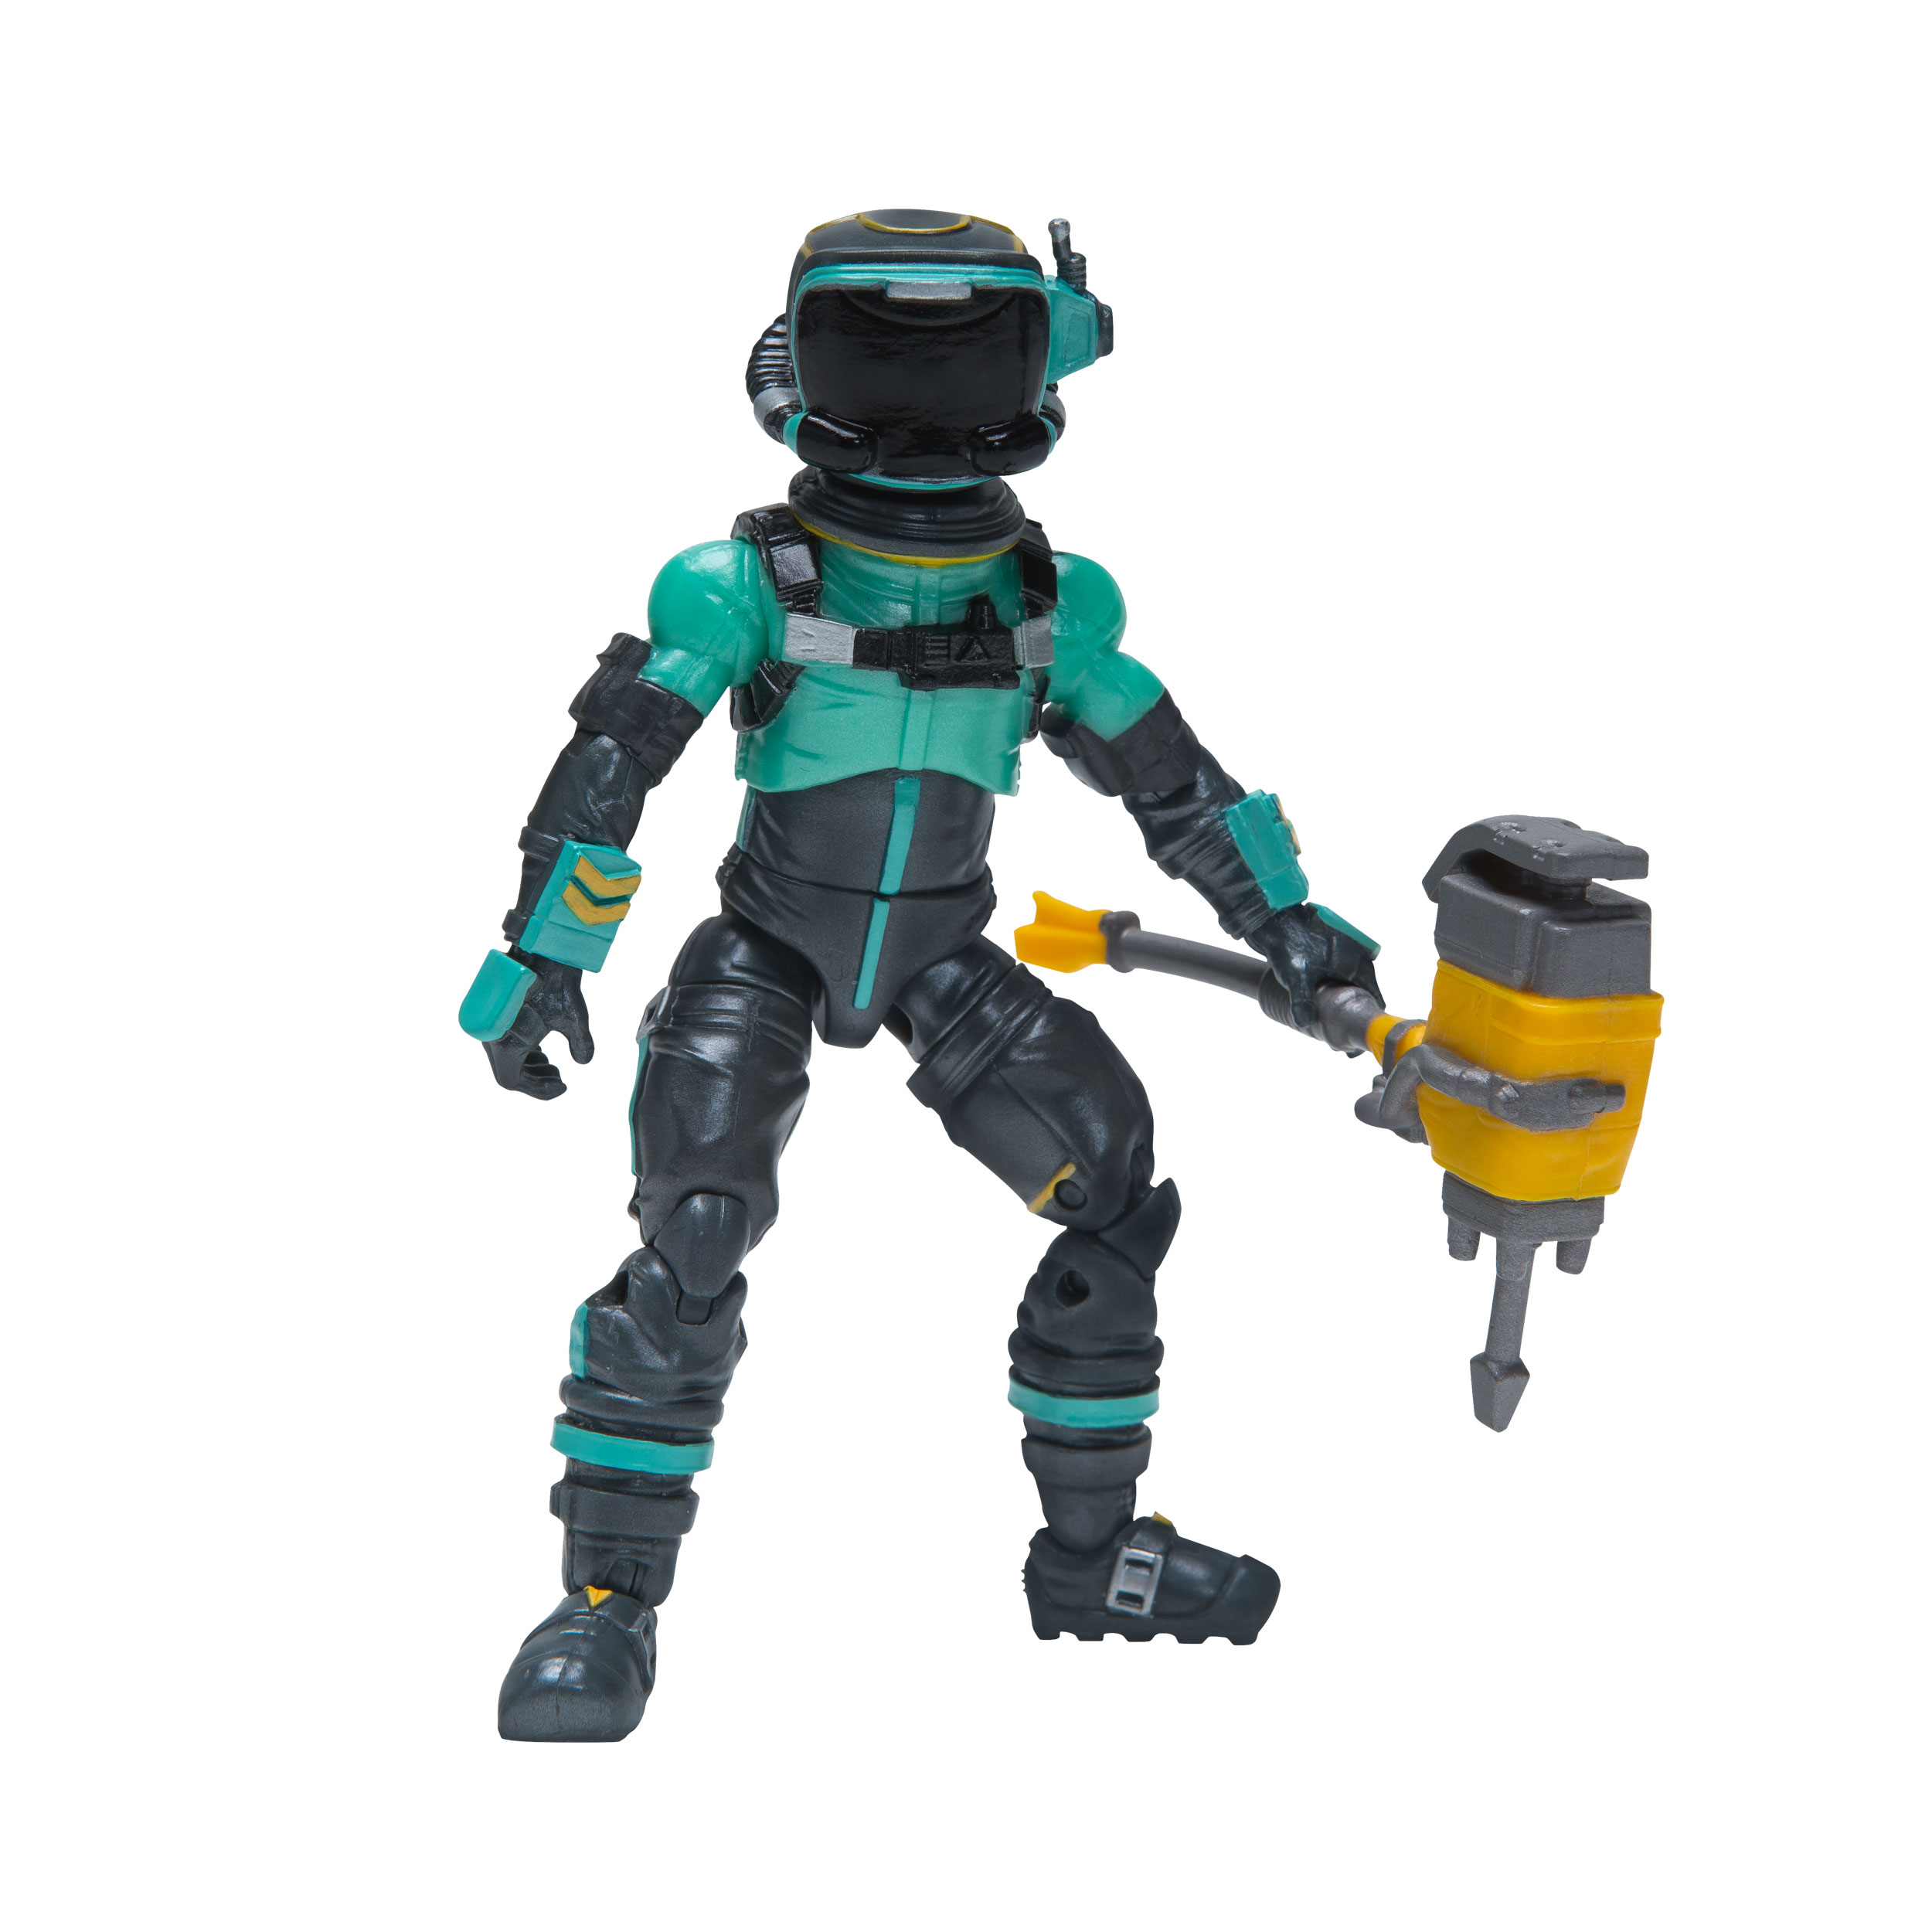 Fortnite Solo Mode Core Figure Pack, Toxic Trooper - image 1 of 3